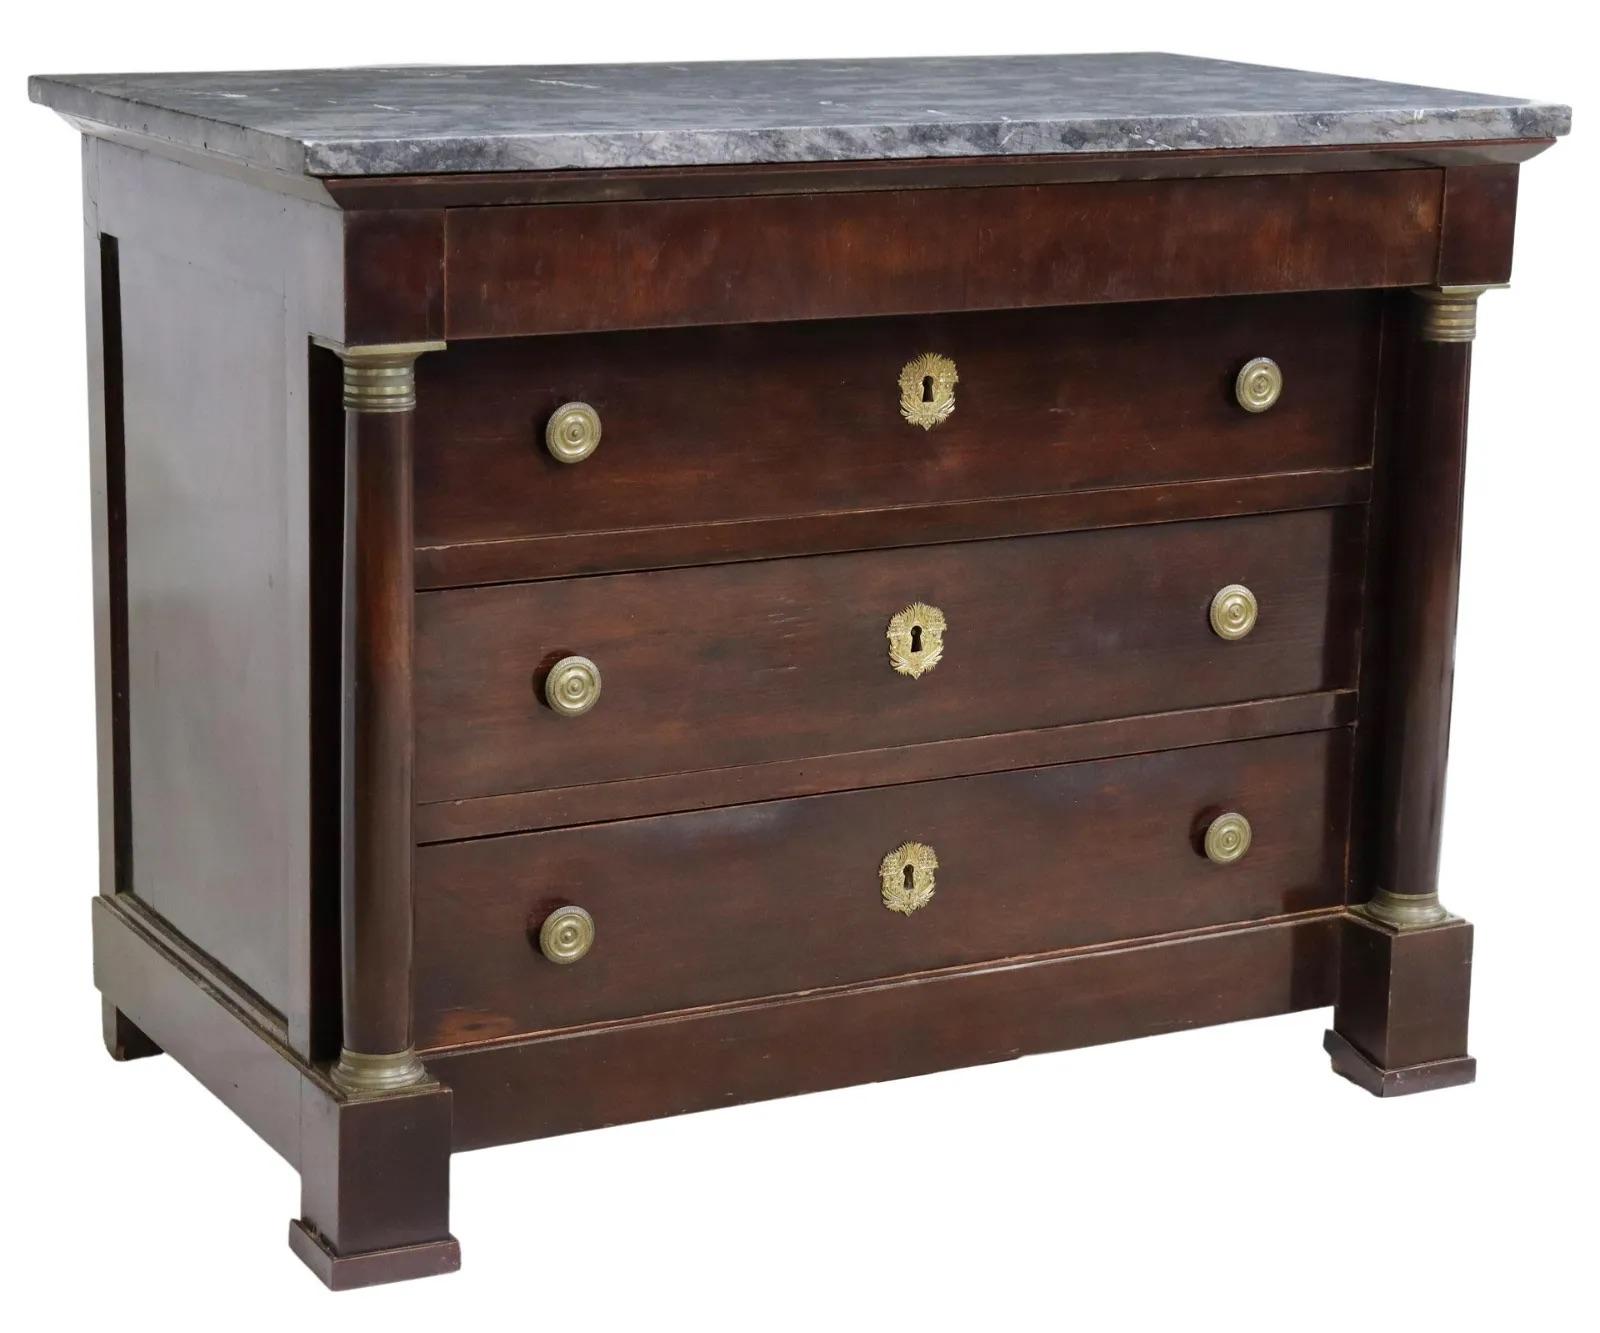 19th Century Antique French Empire Style Marble-Top Mahogany Commode For Sale